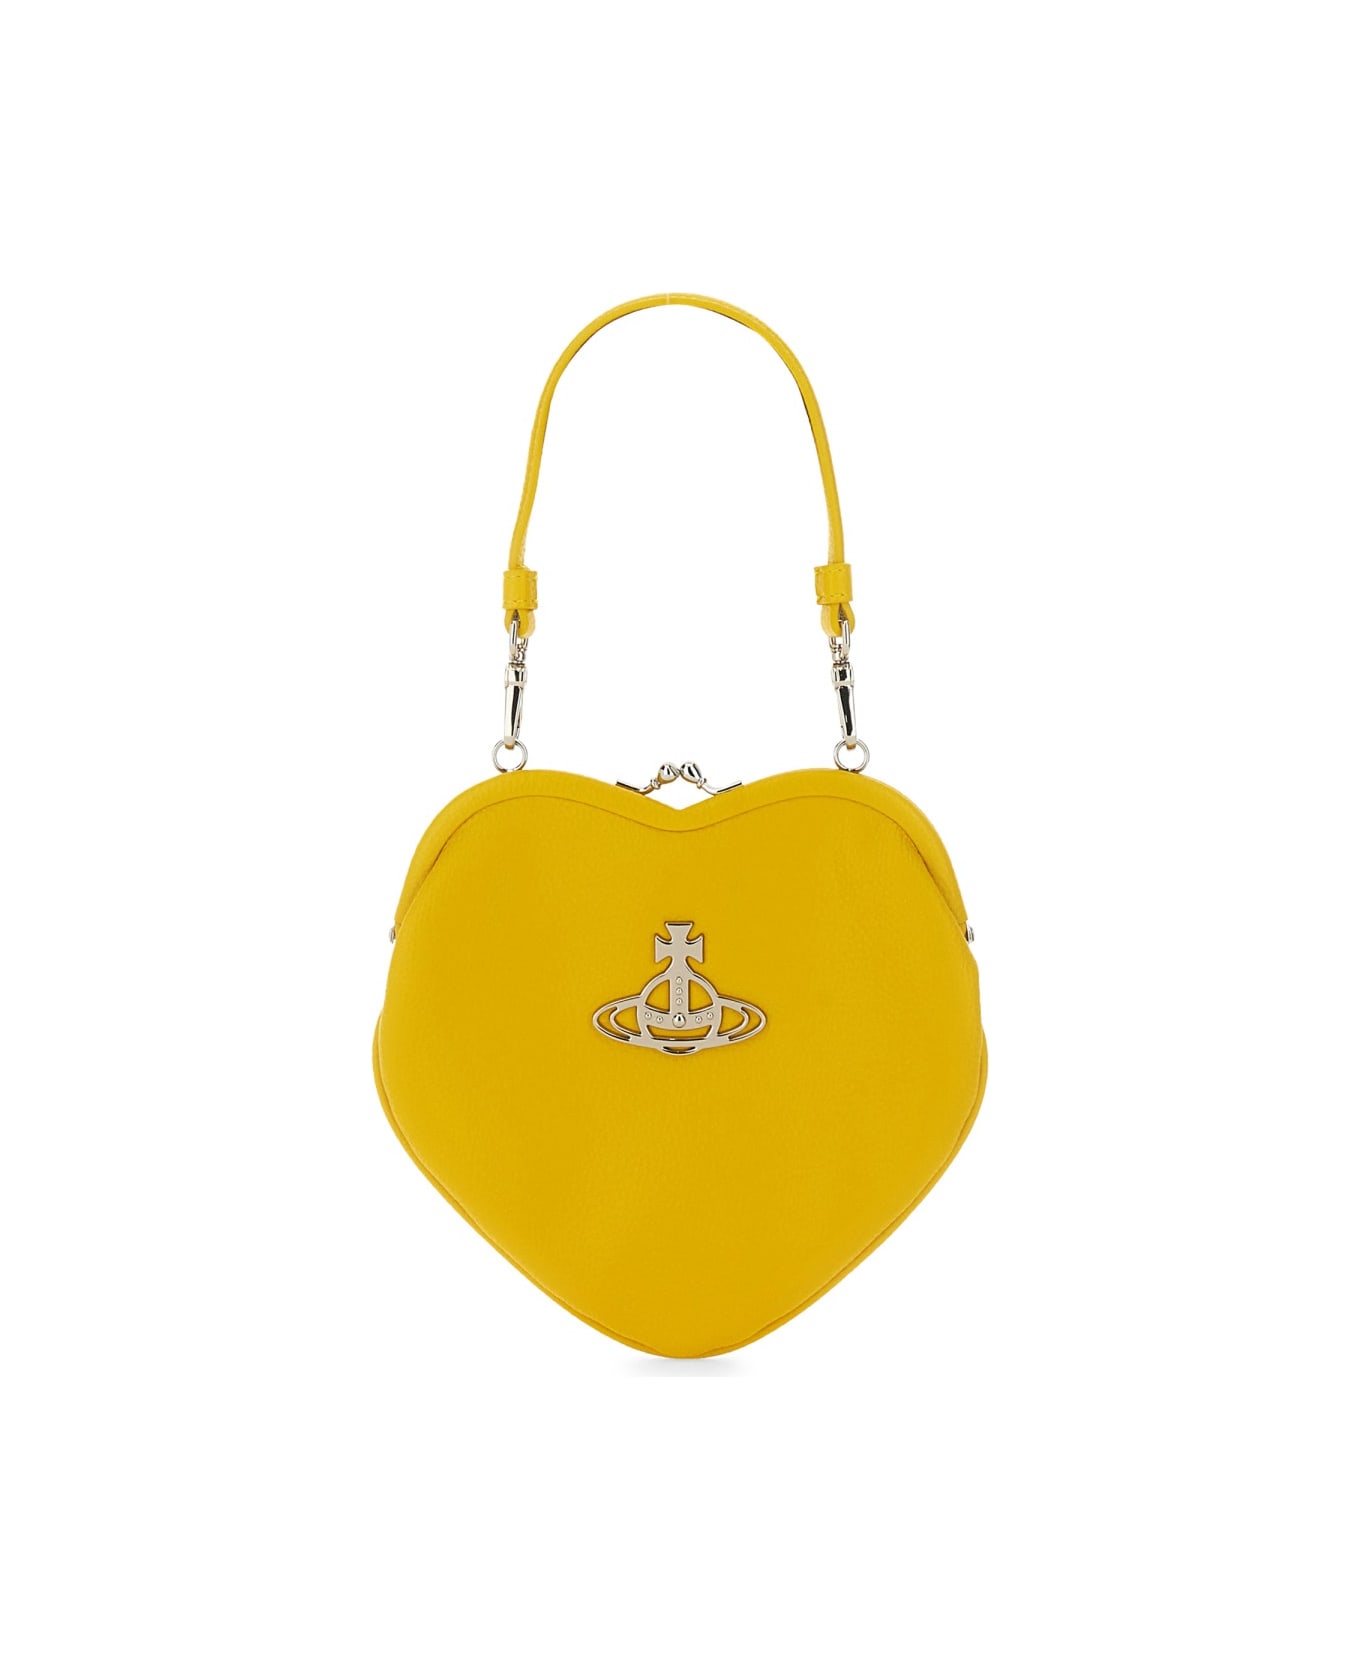 Vivienne Westwood "belle" Heart Frame Bag - YELLOW クラッチバッグ